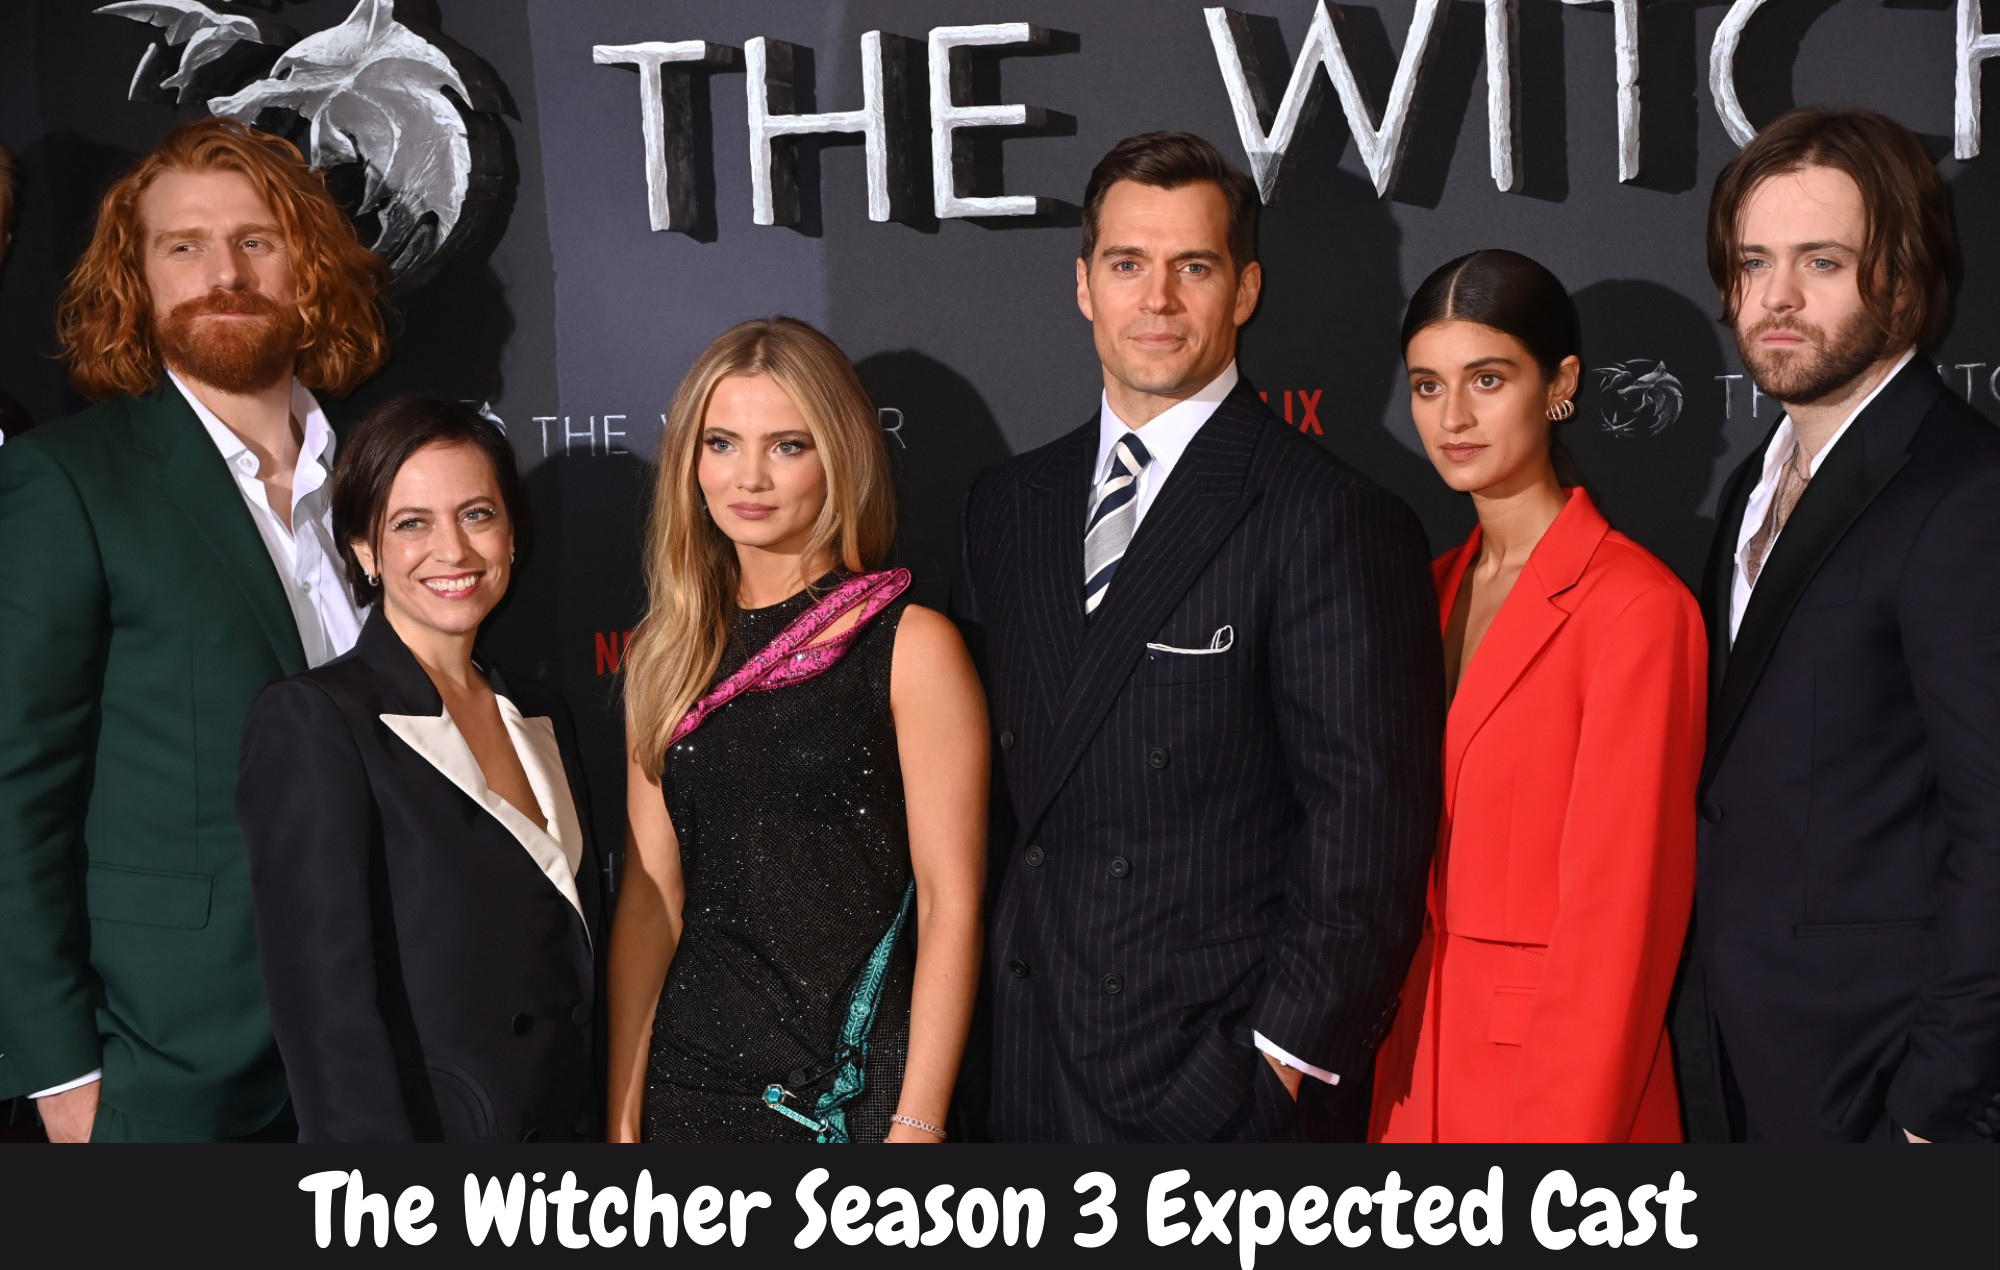 The Witcher Season 3 Expected Cast